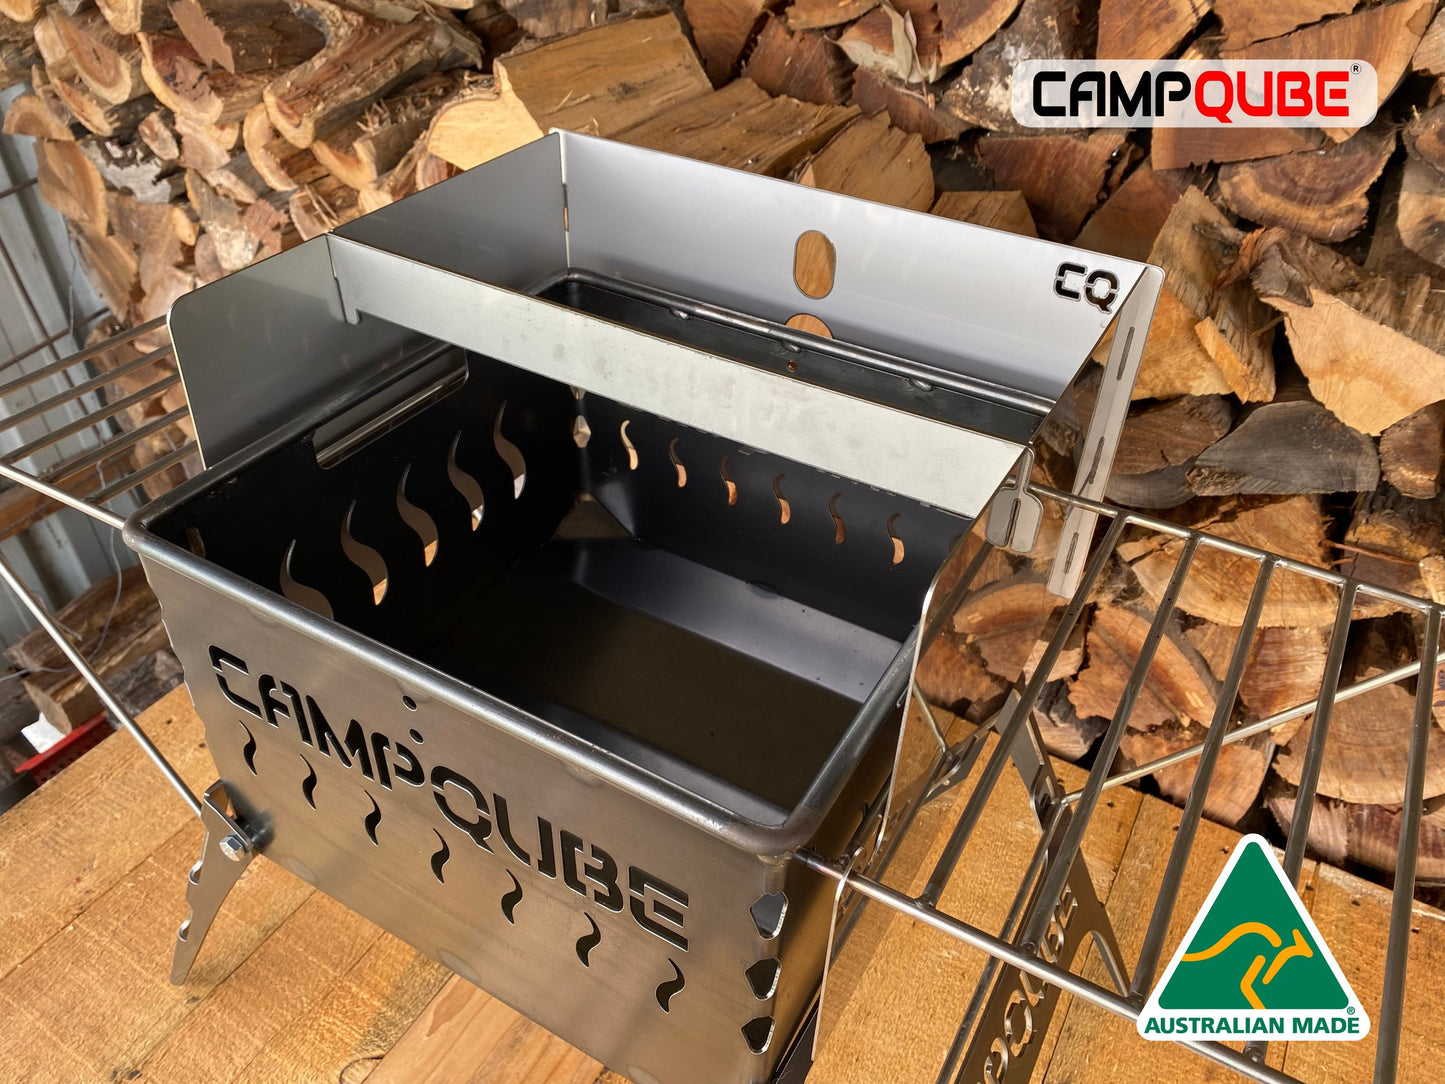 **IN STOCK READY TO SHIP** WINDSHIELD AND FULLSIZE GRILL - FOR CAMPQUBE